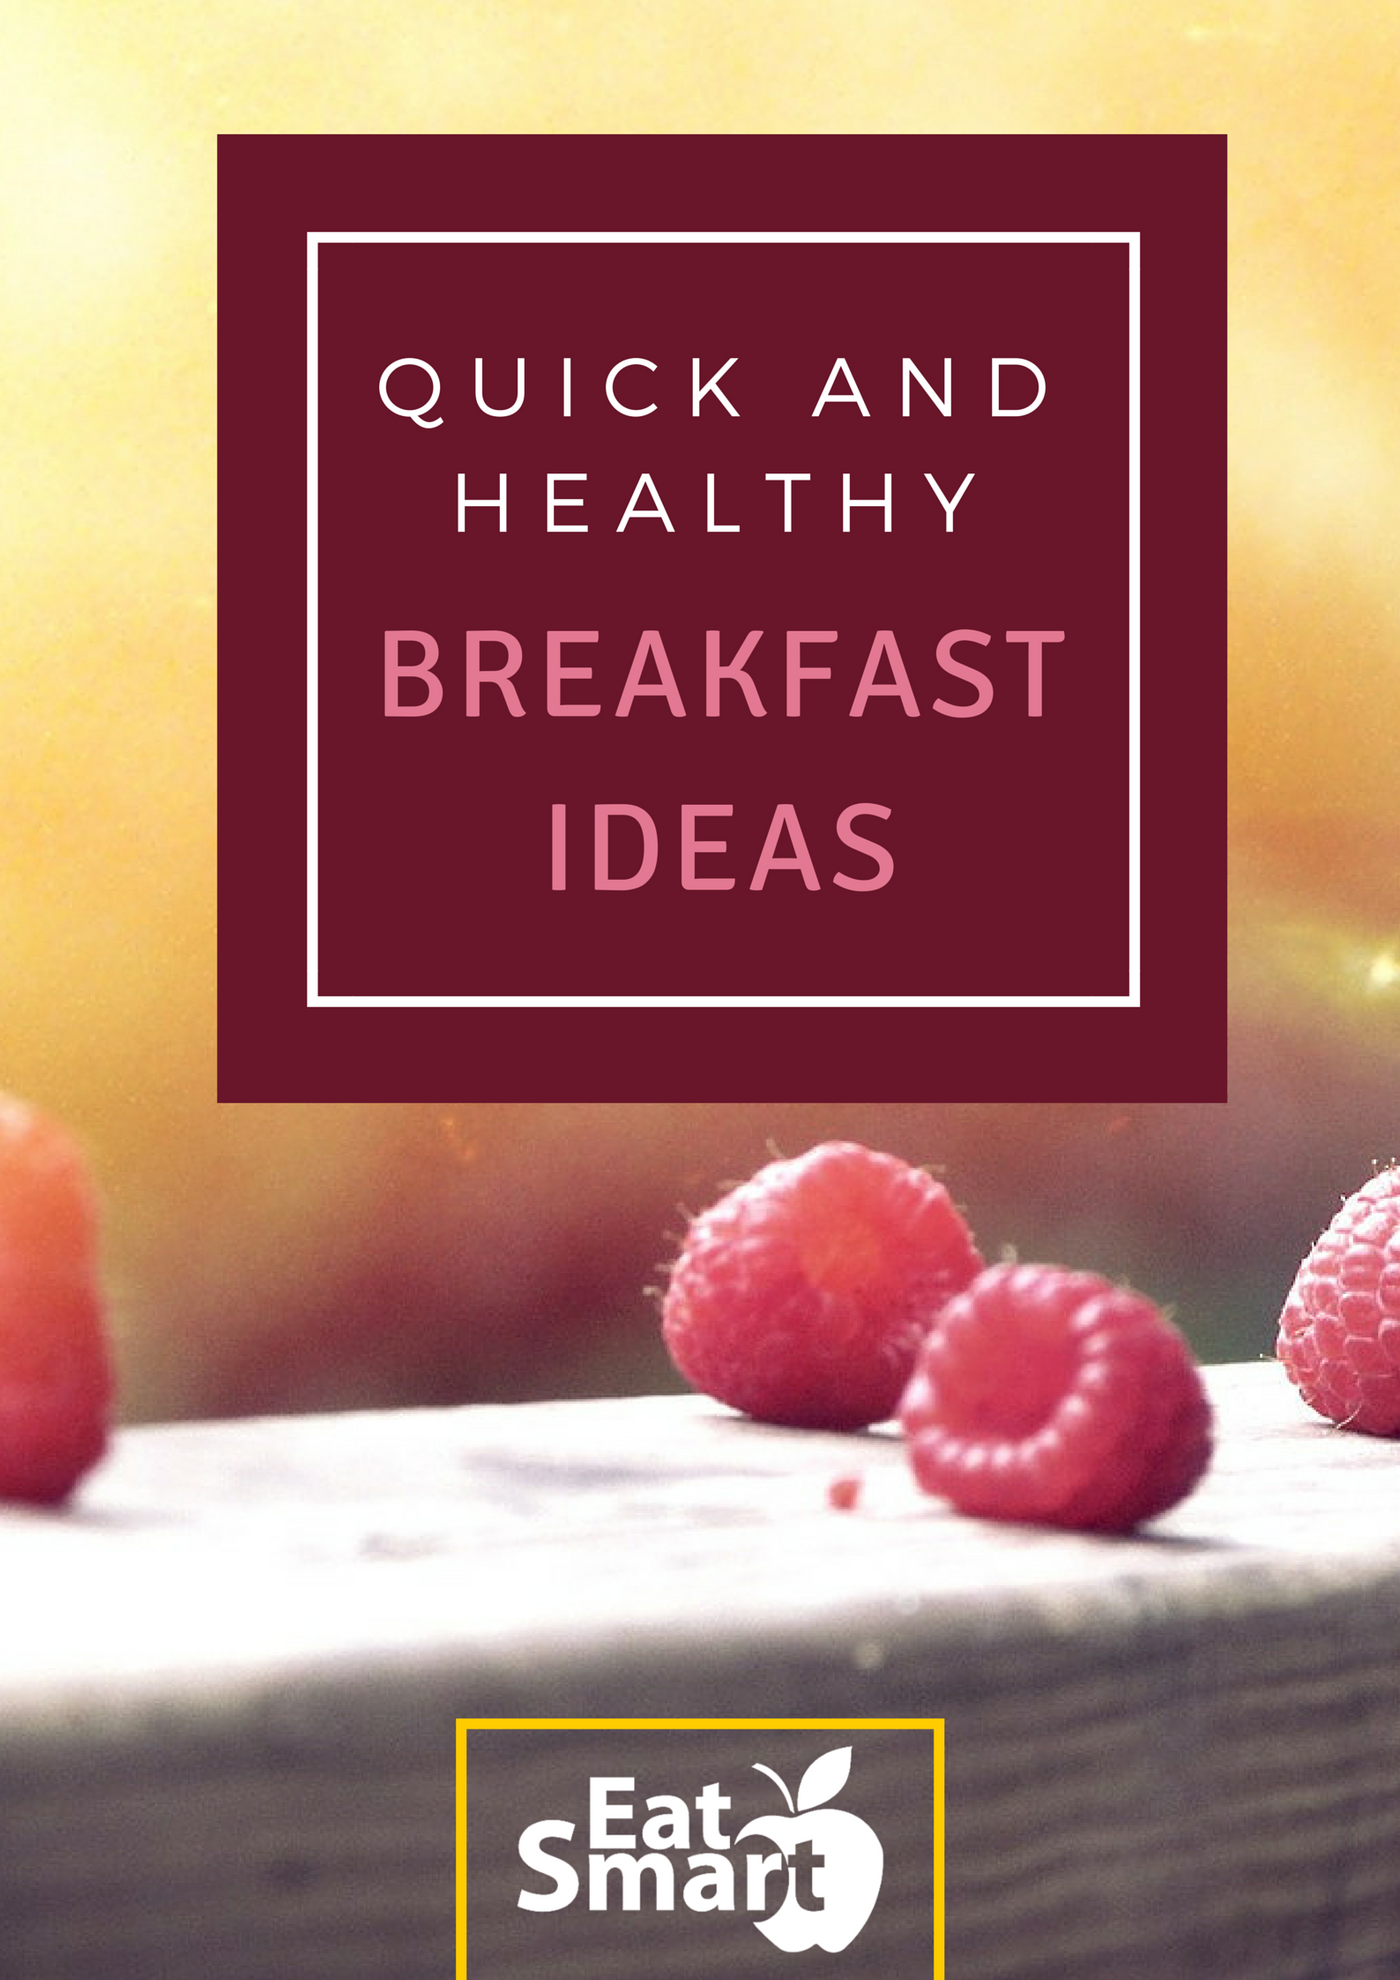 Quick and Healthy Breakfast Ideas for People On The Go